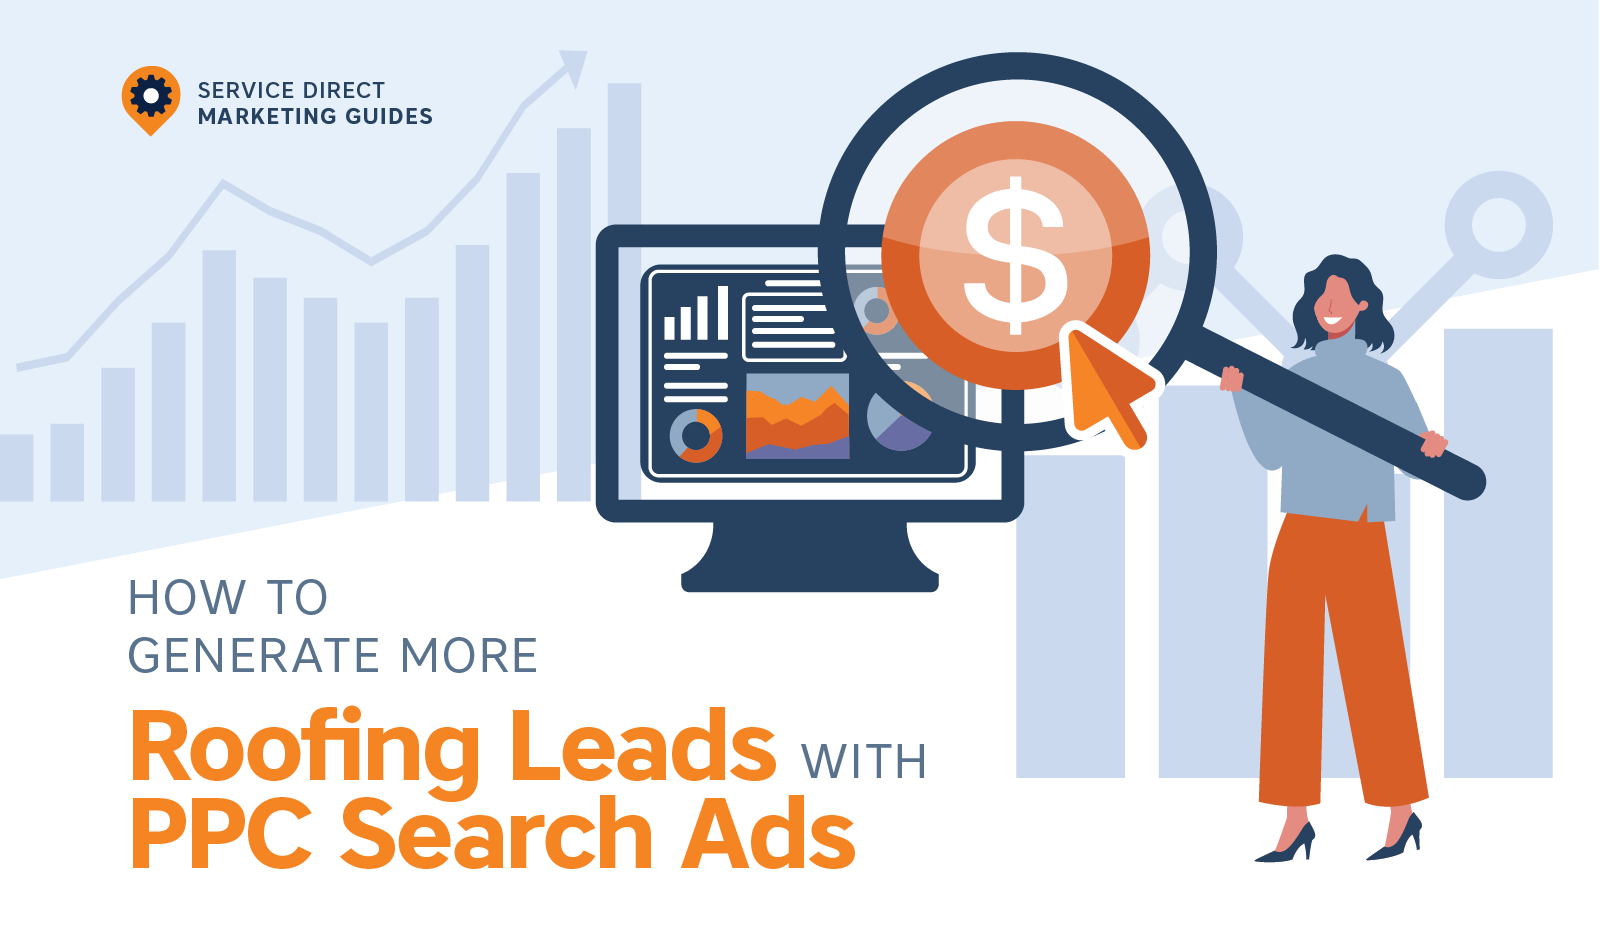 How to Generate More Roofing Leads with PPC Search Ads